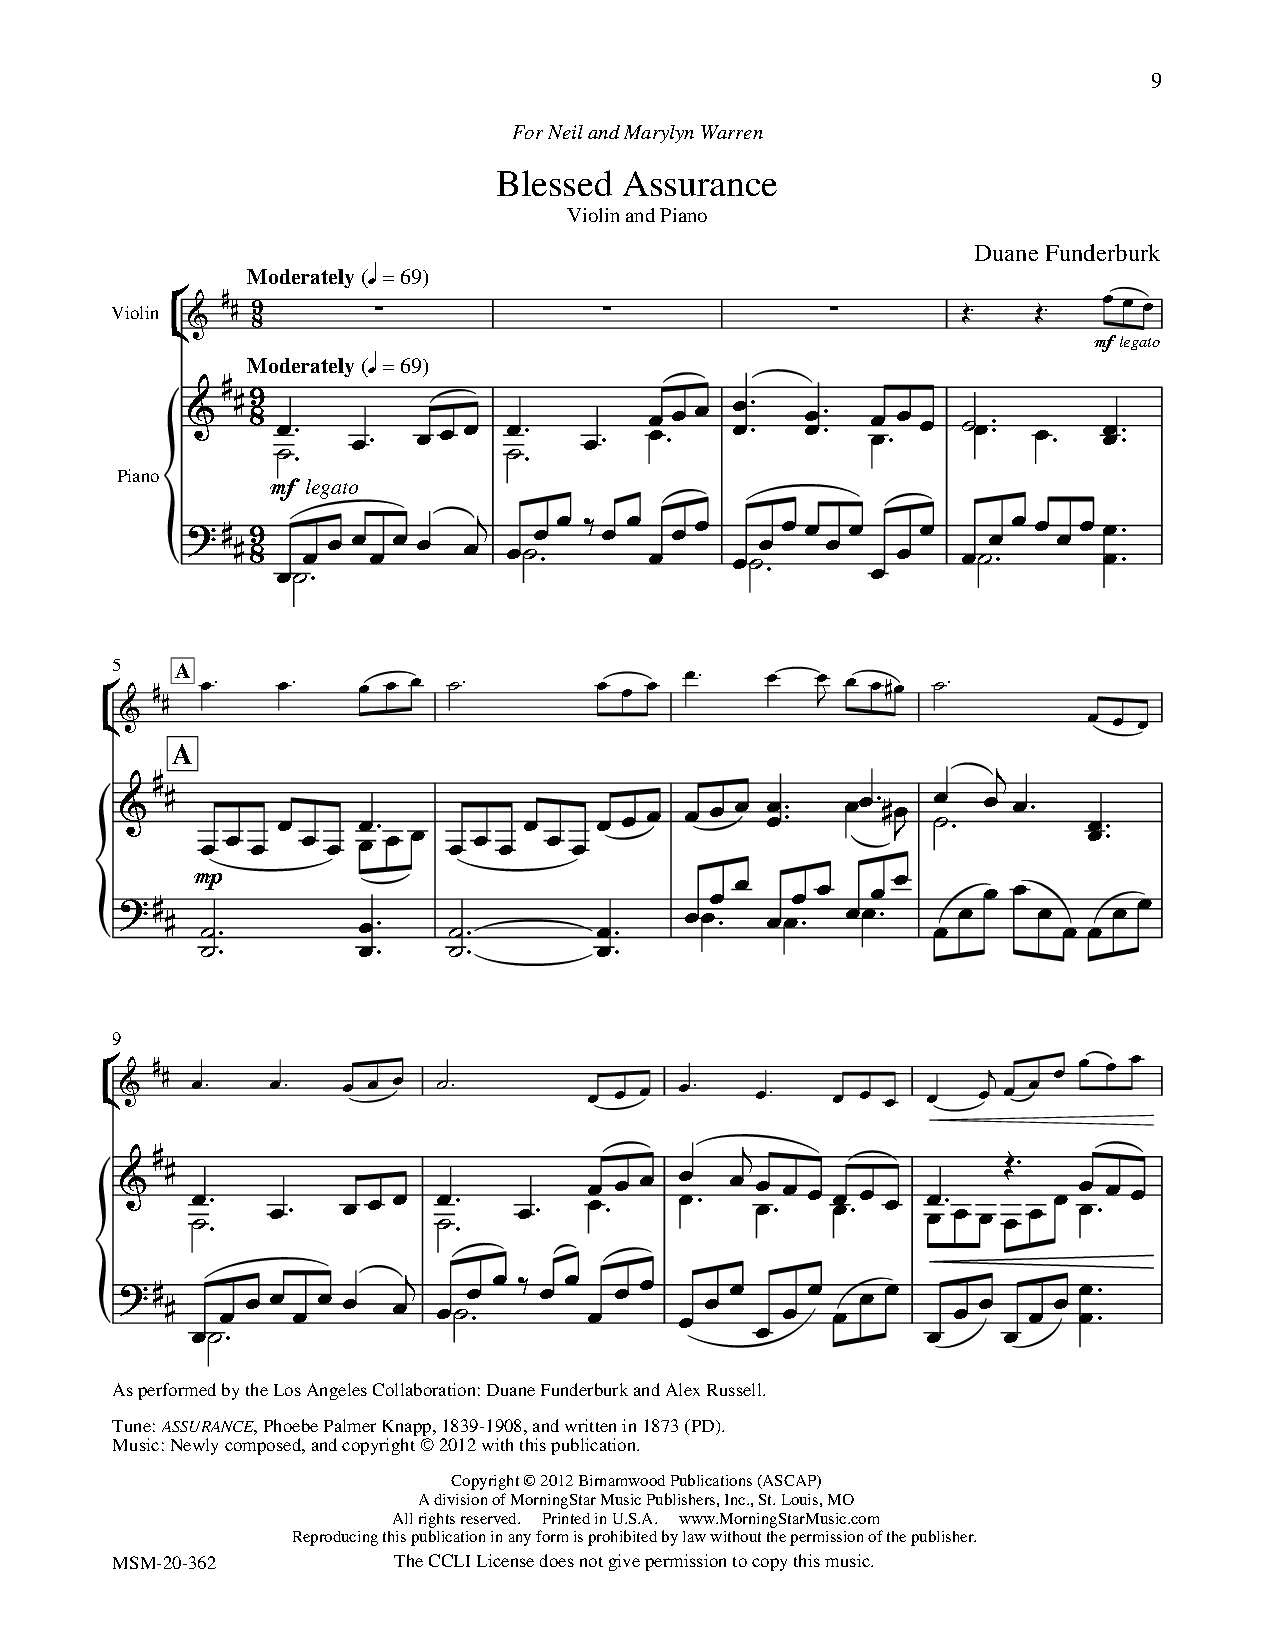 TWO PIECES FOR VIOLIN AND PIANO